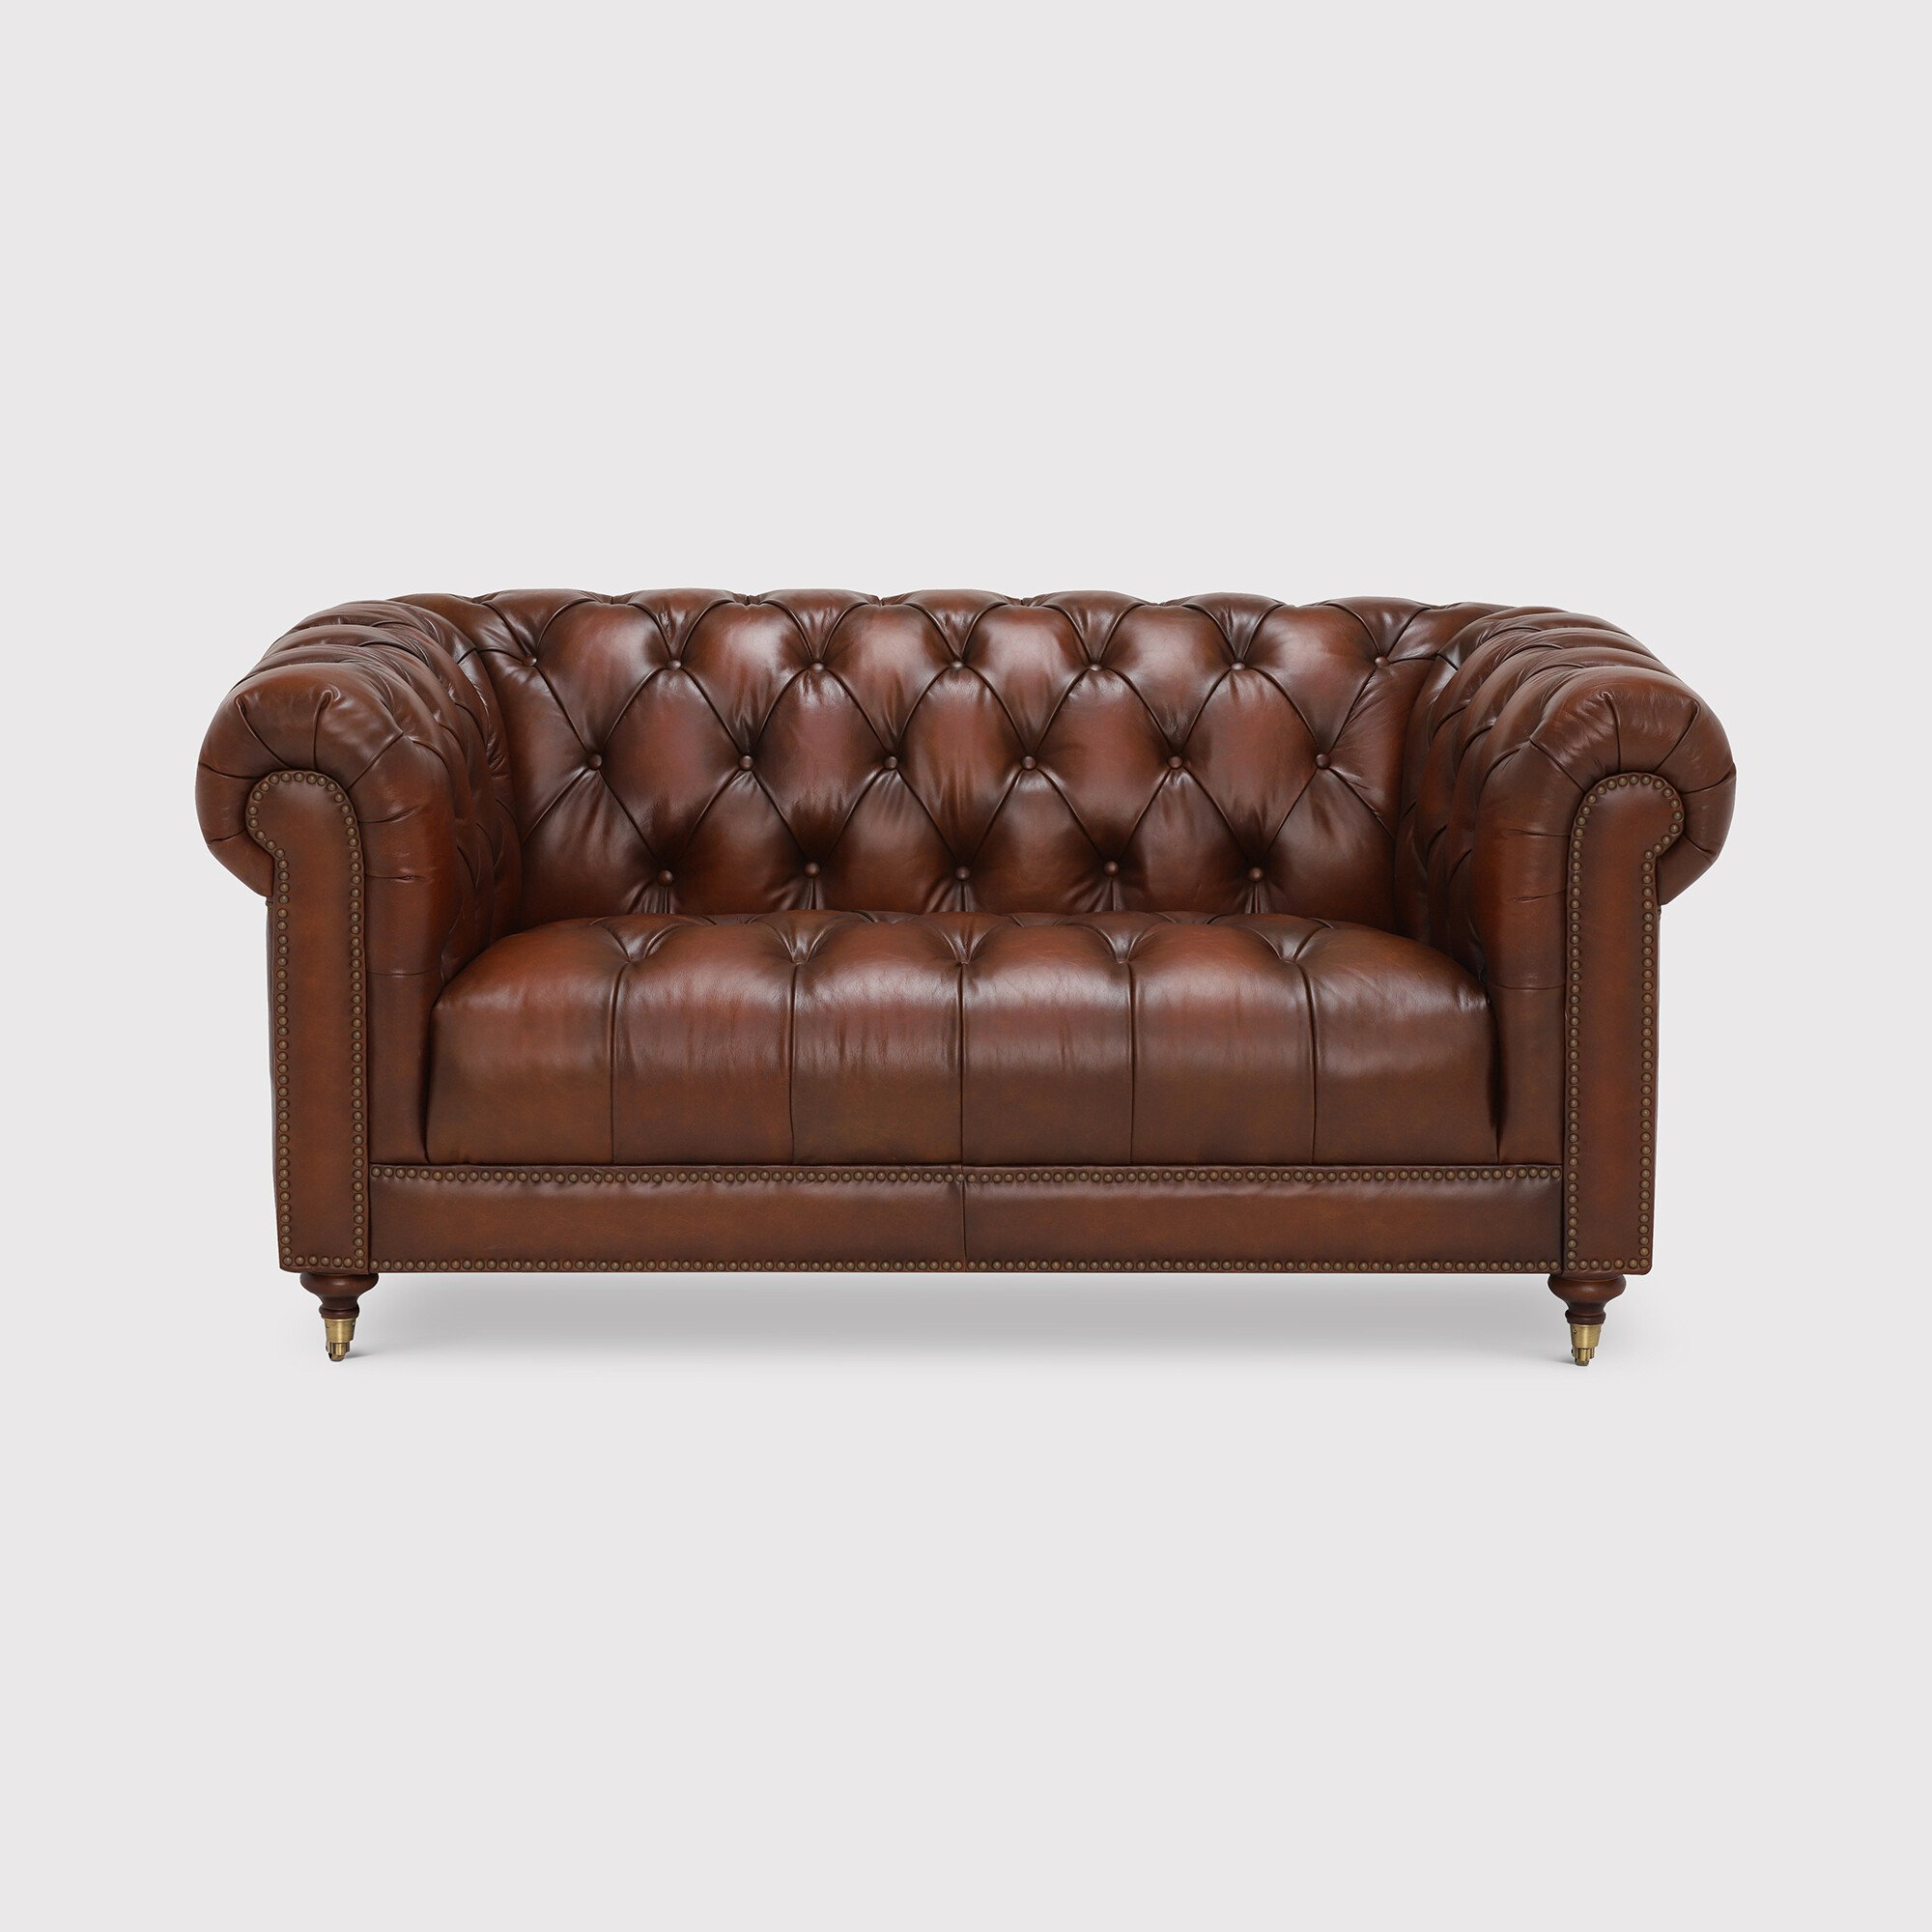 Ullswater 2 Seater Leather Chesterfield Sofa, Brown | Barker & Stonehouse